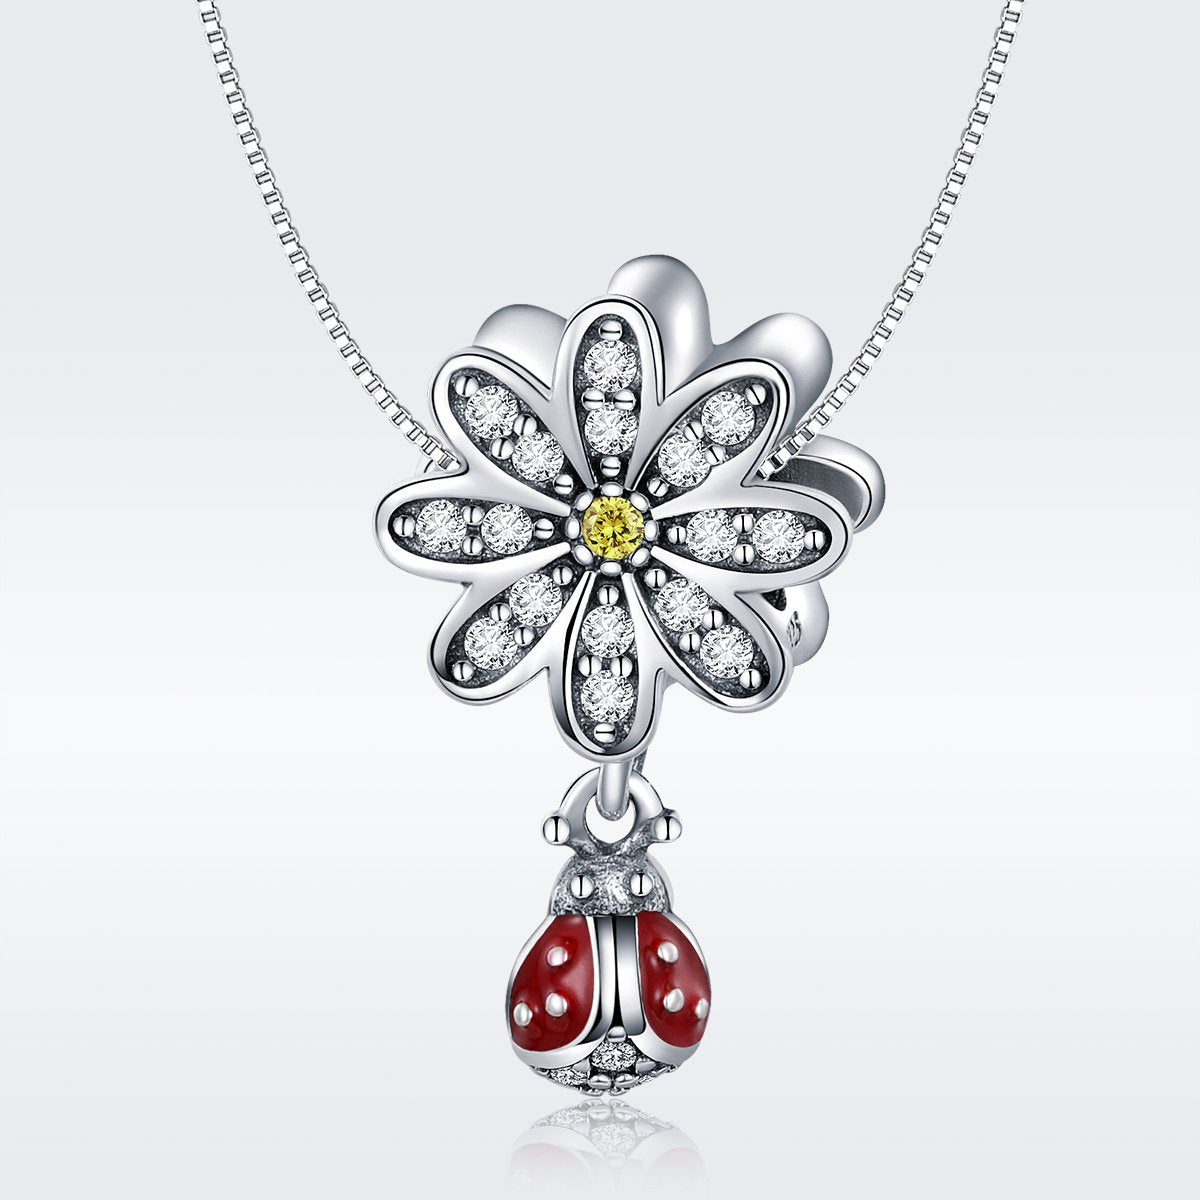 Sterling 925 silver charm the ladybug and flower fits Pandora charm and European charm bracelet Xaxe.com